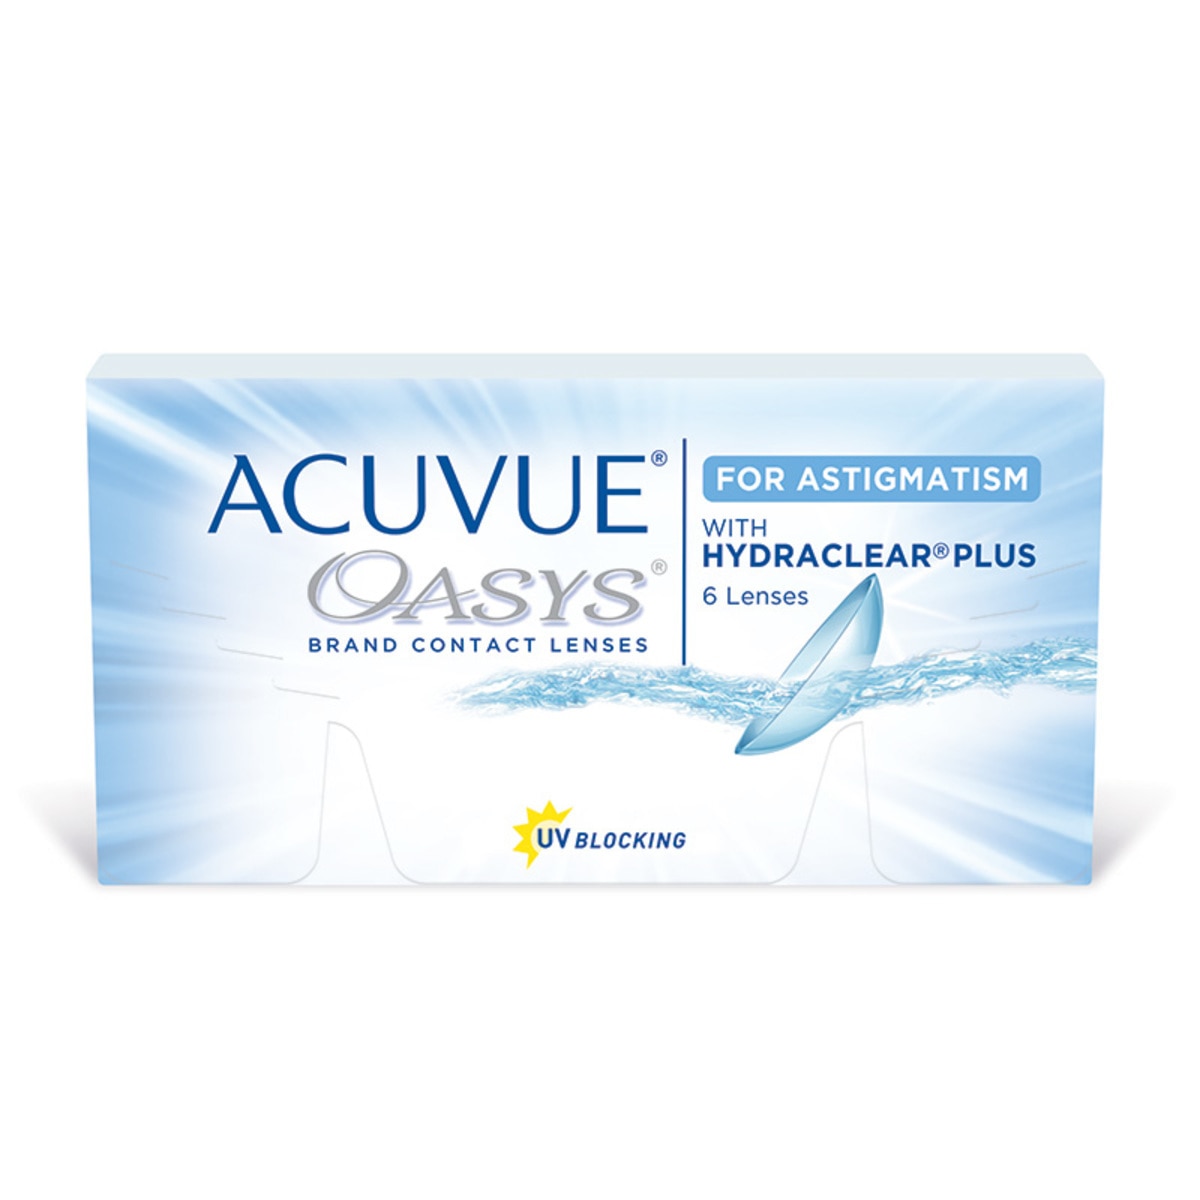 ACUVUE OASYS® con HYDRACLEAR Plus® para Astigmatismo (D -4.25, Cyl/Axis -1.75/60)